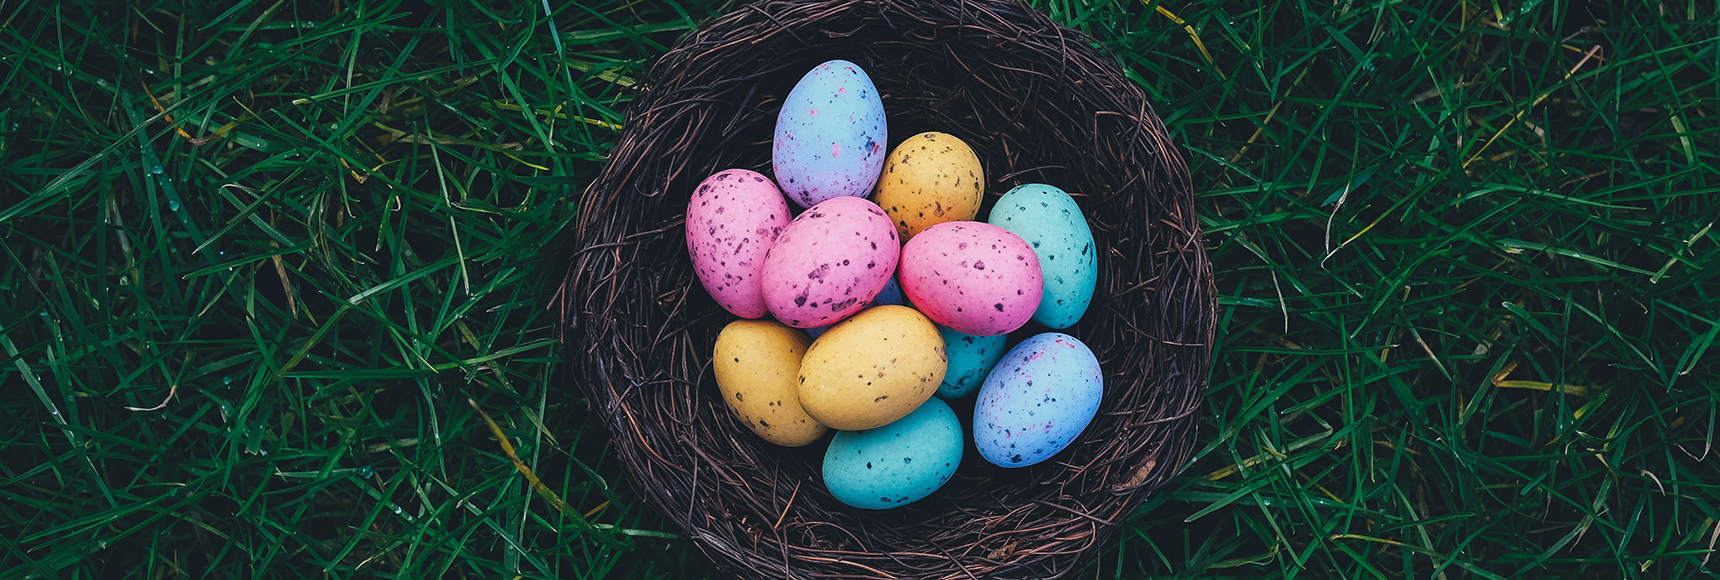 A basket of easter eggs in the grass